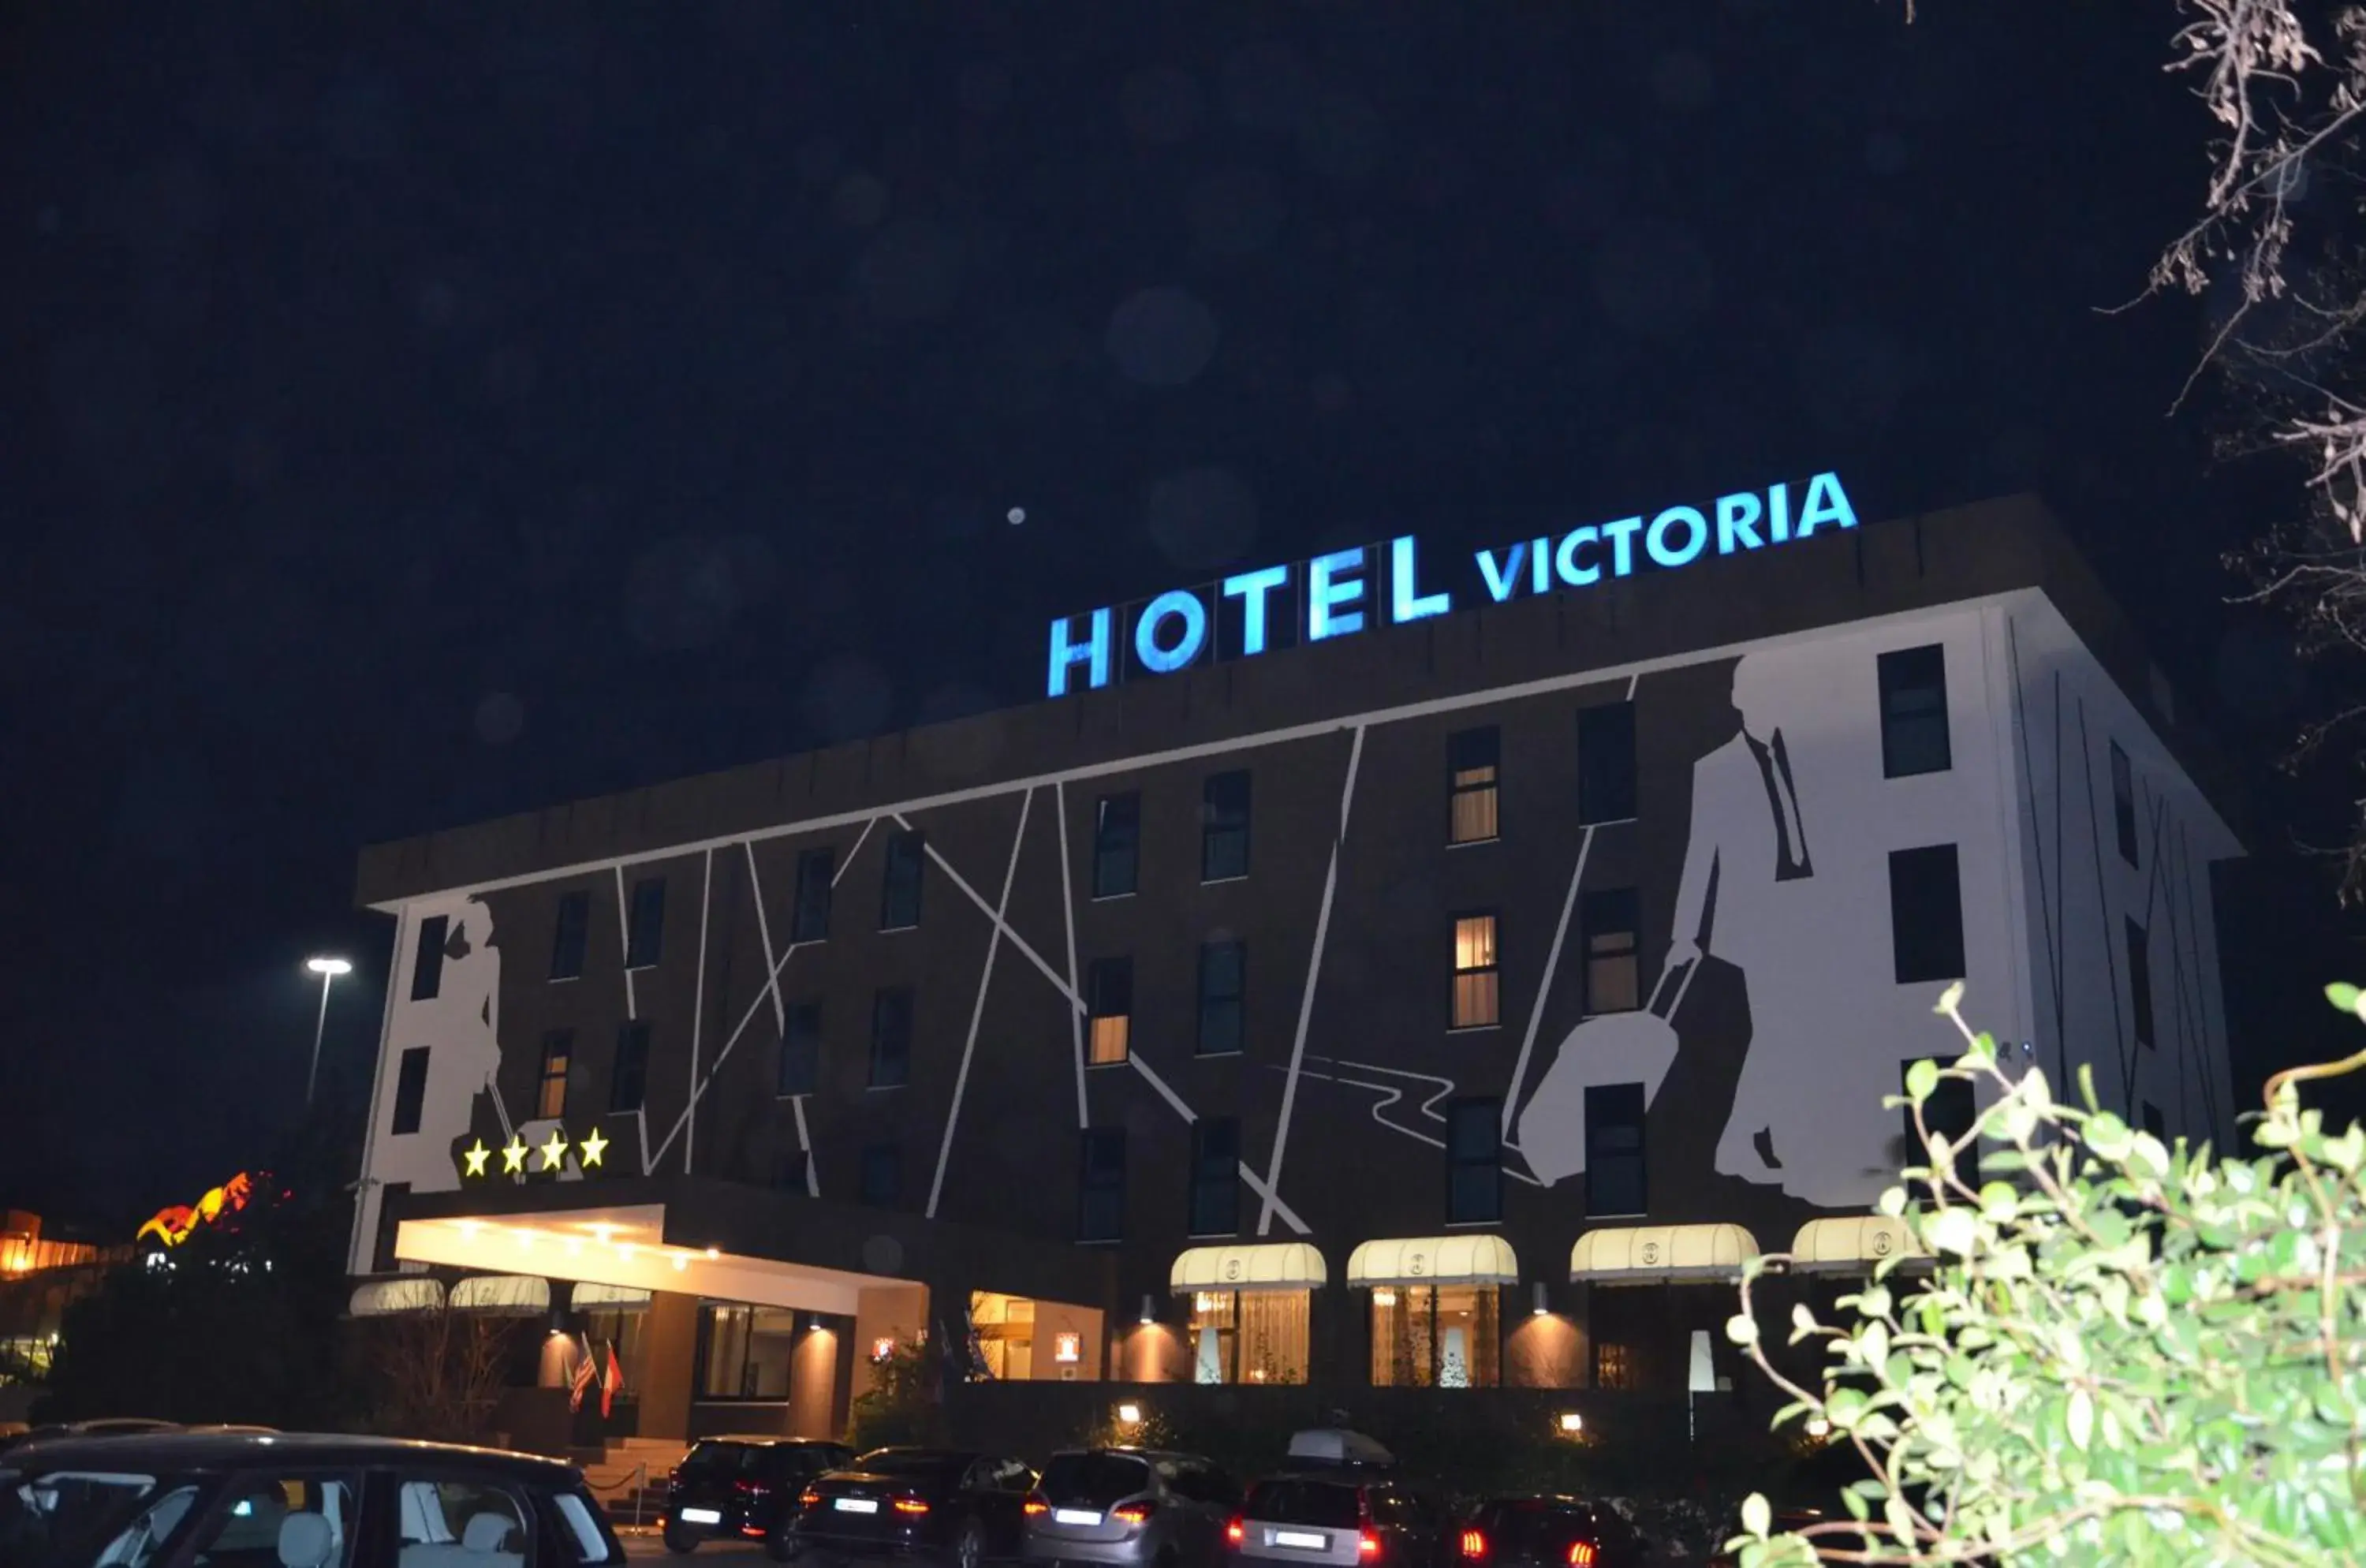 Property Building in Hotel Victoria